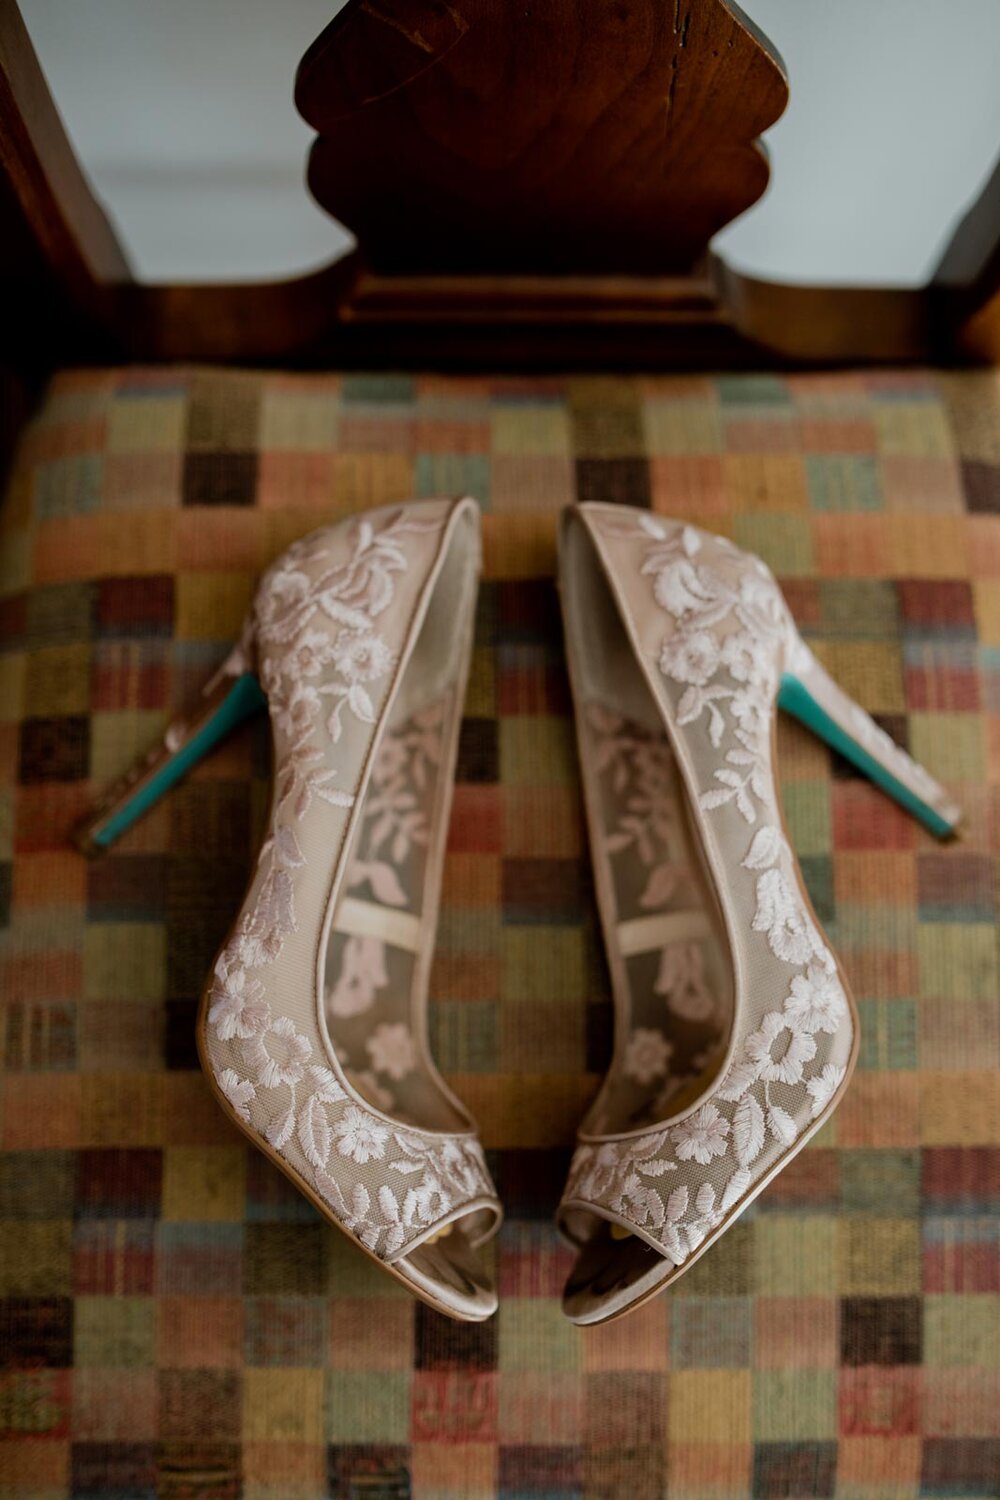 High heeled shoe with light pink floral embroidery and teal heals in Mendocino CA Carly Romeo + Co.